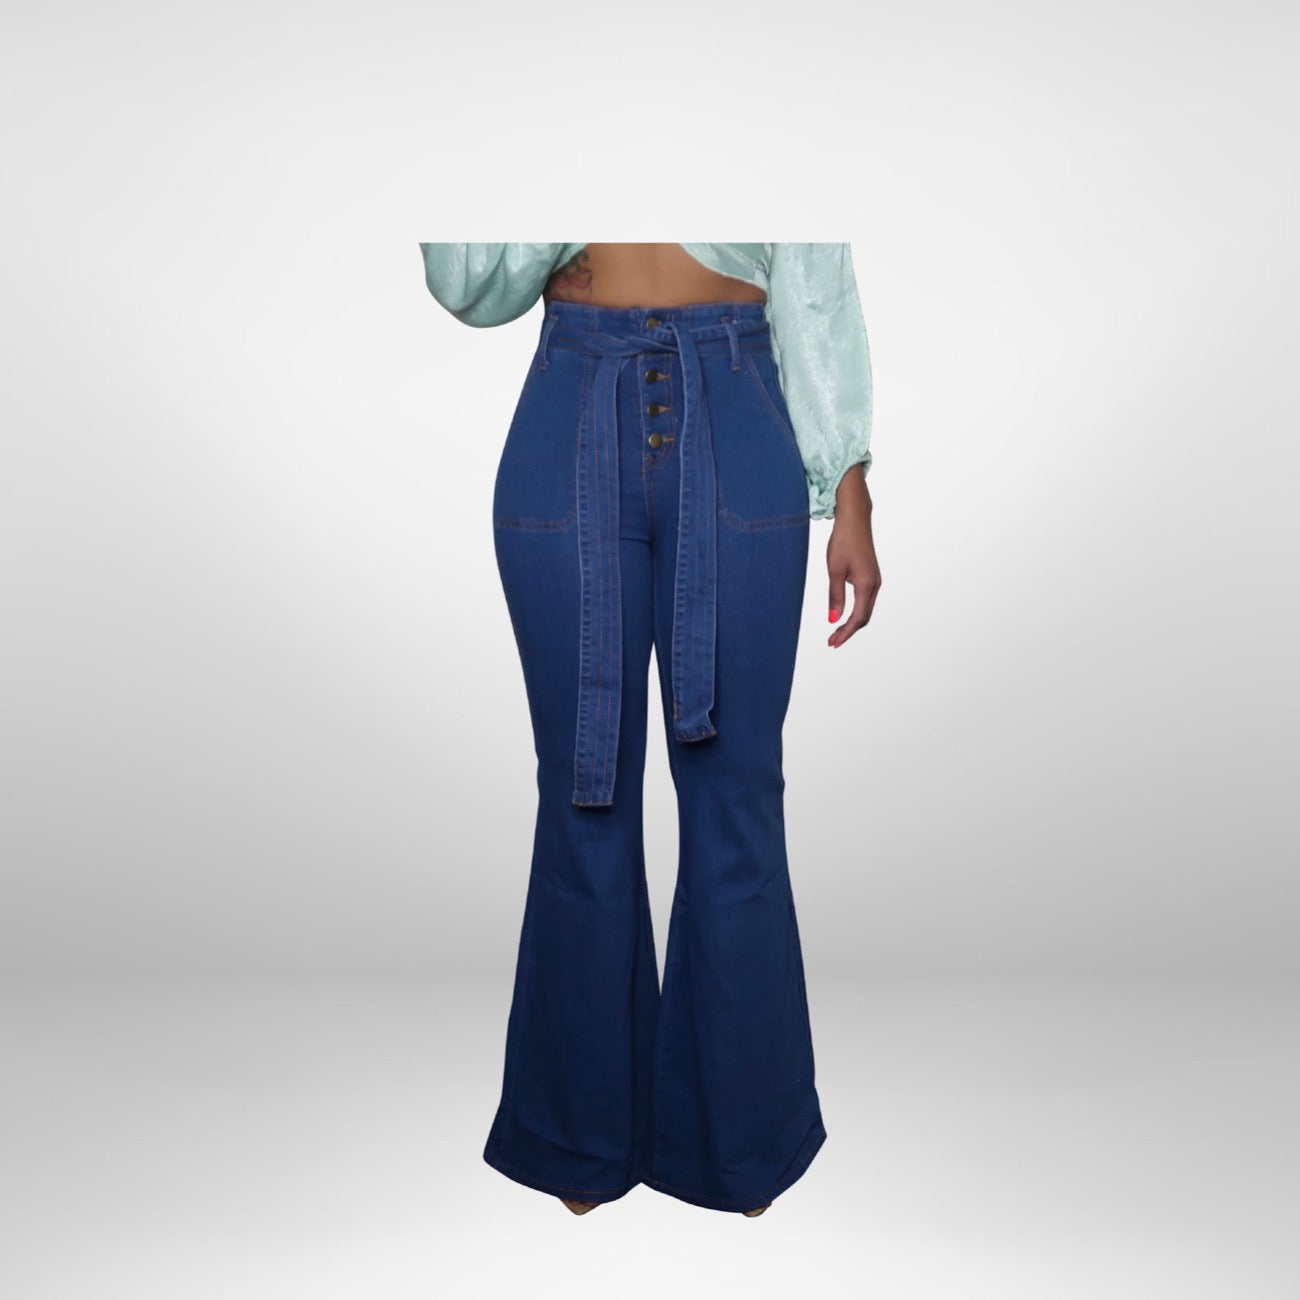 Flirty fit wide leg flare jeans with detachable belt that accentuates the waist. Features front pockets and button detail.